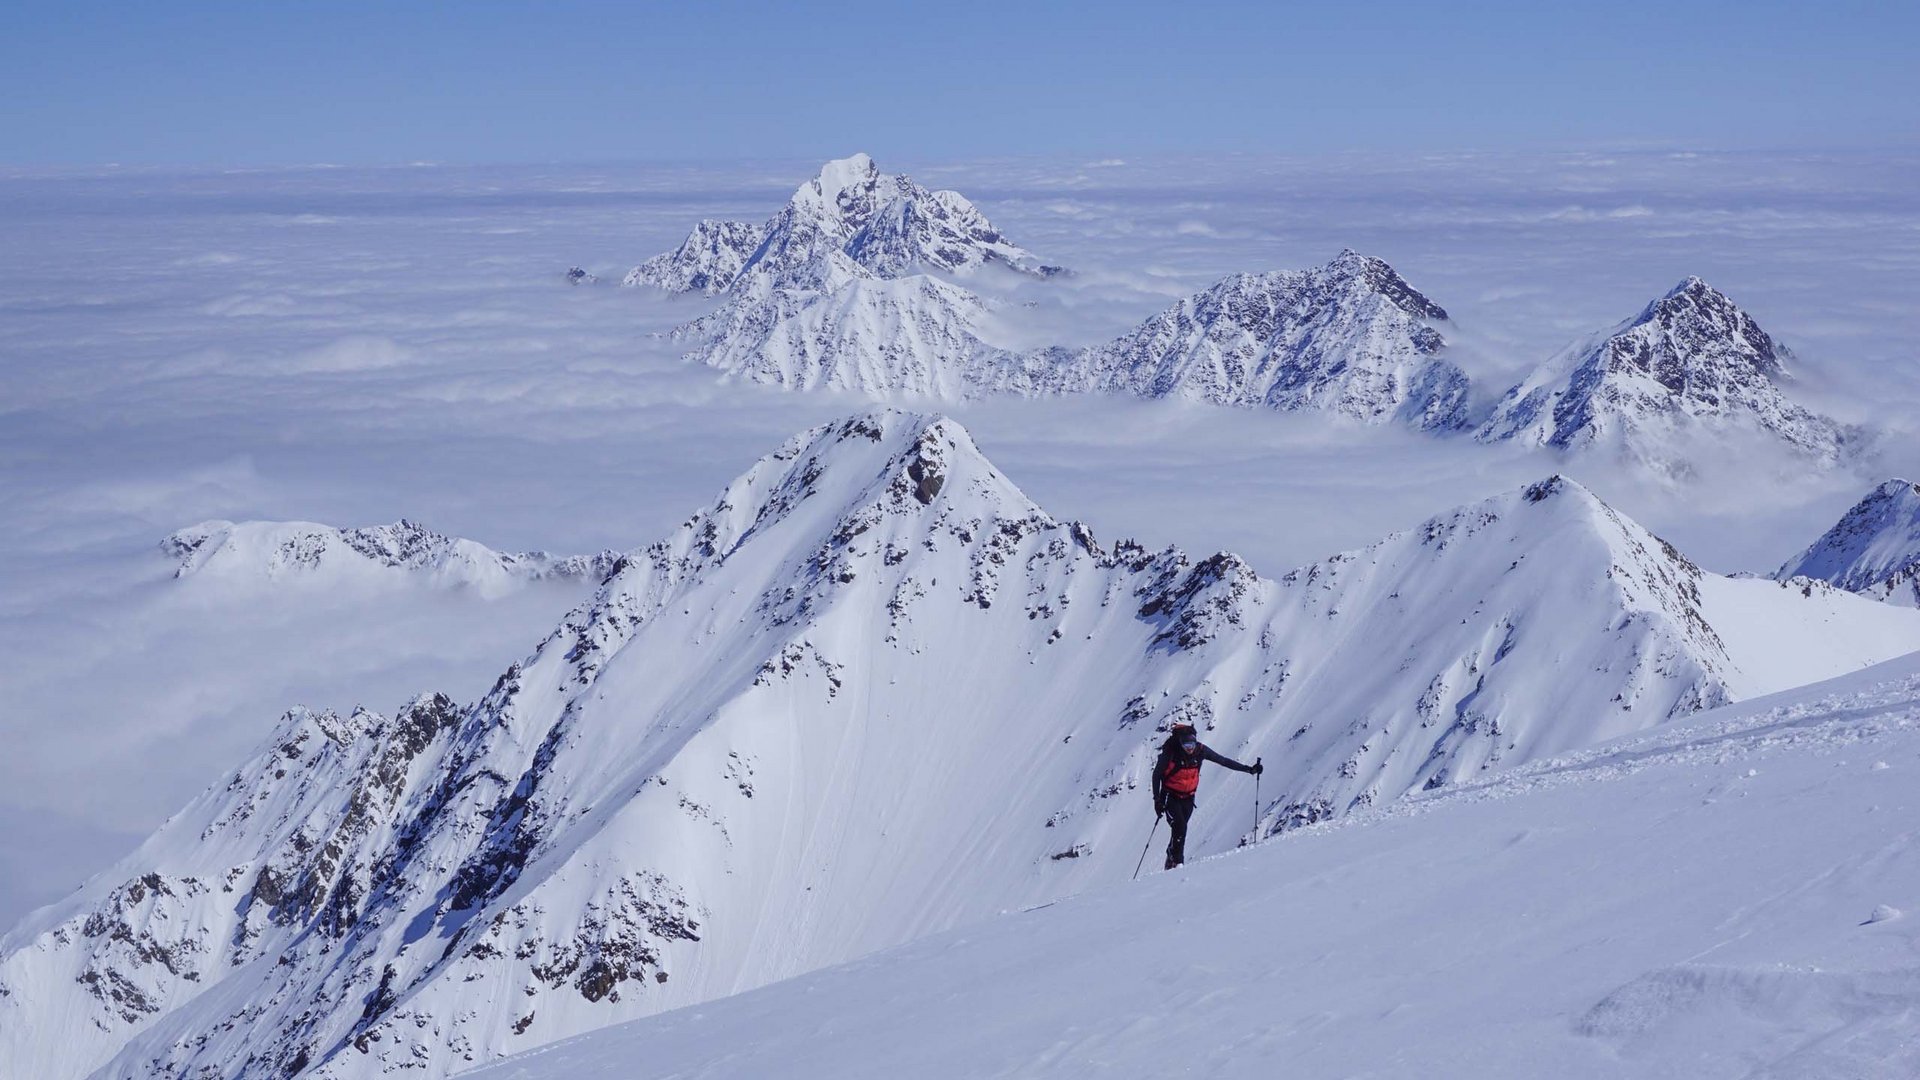 Wipptal: a dream for ski touring enthusiasts